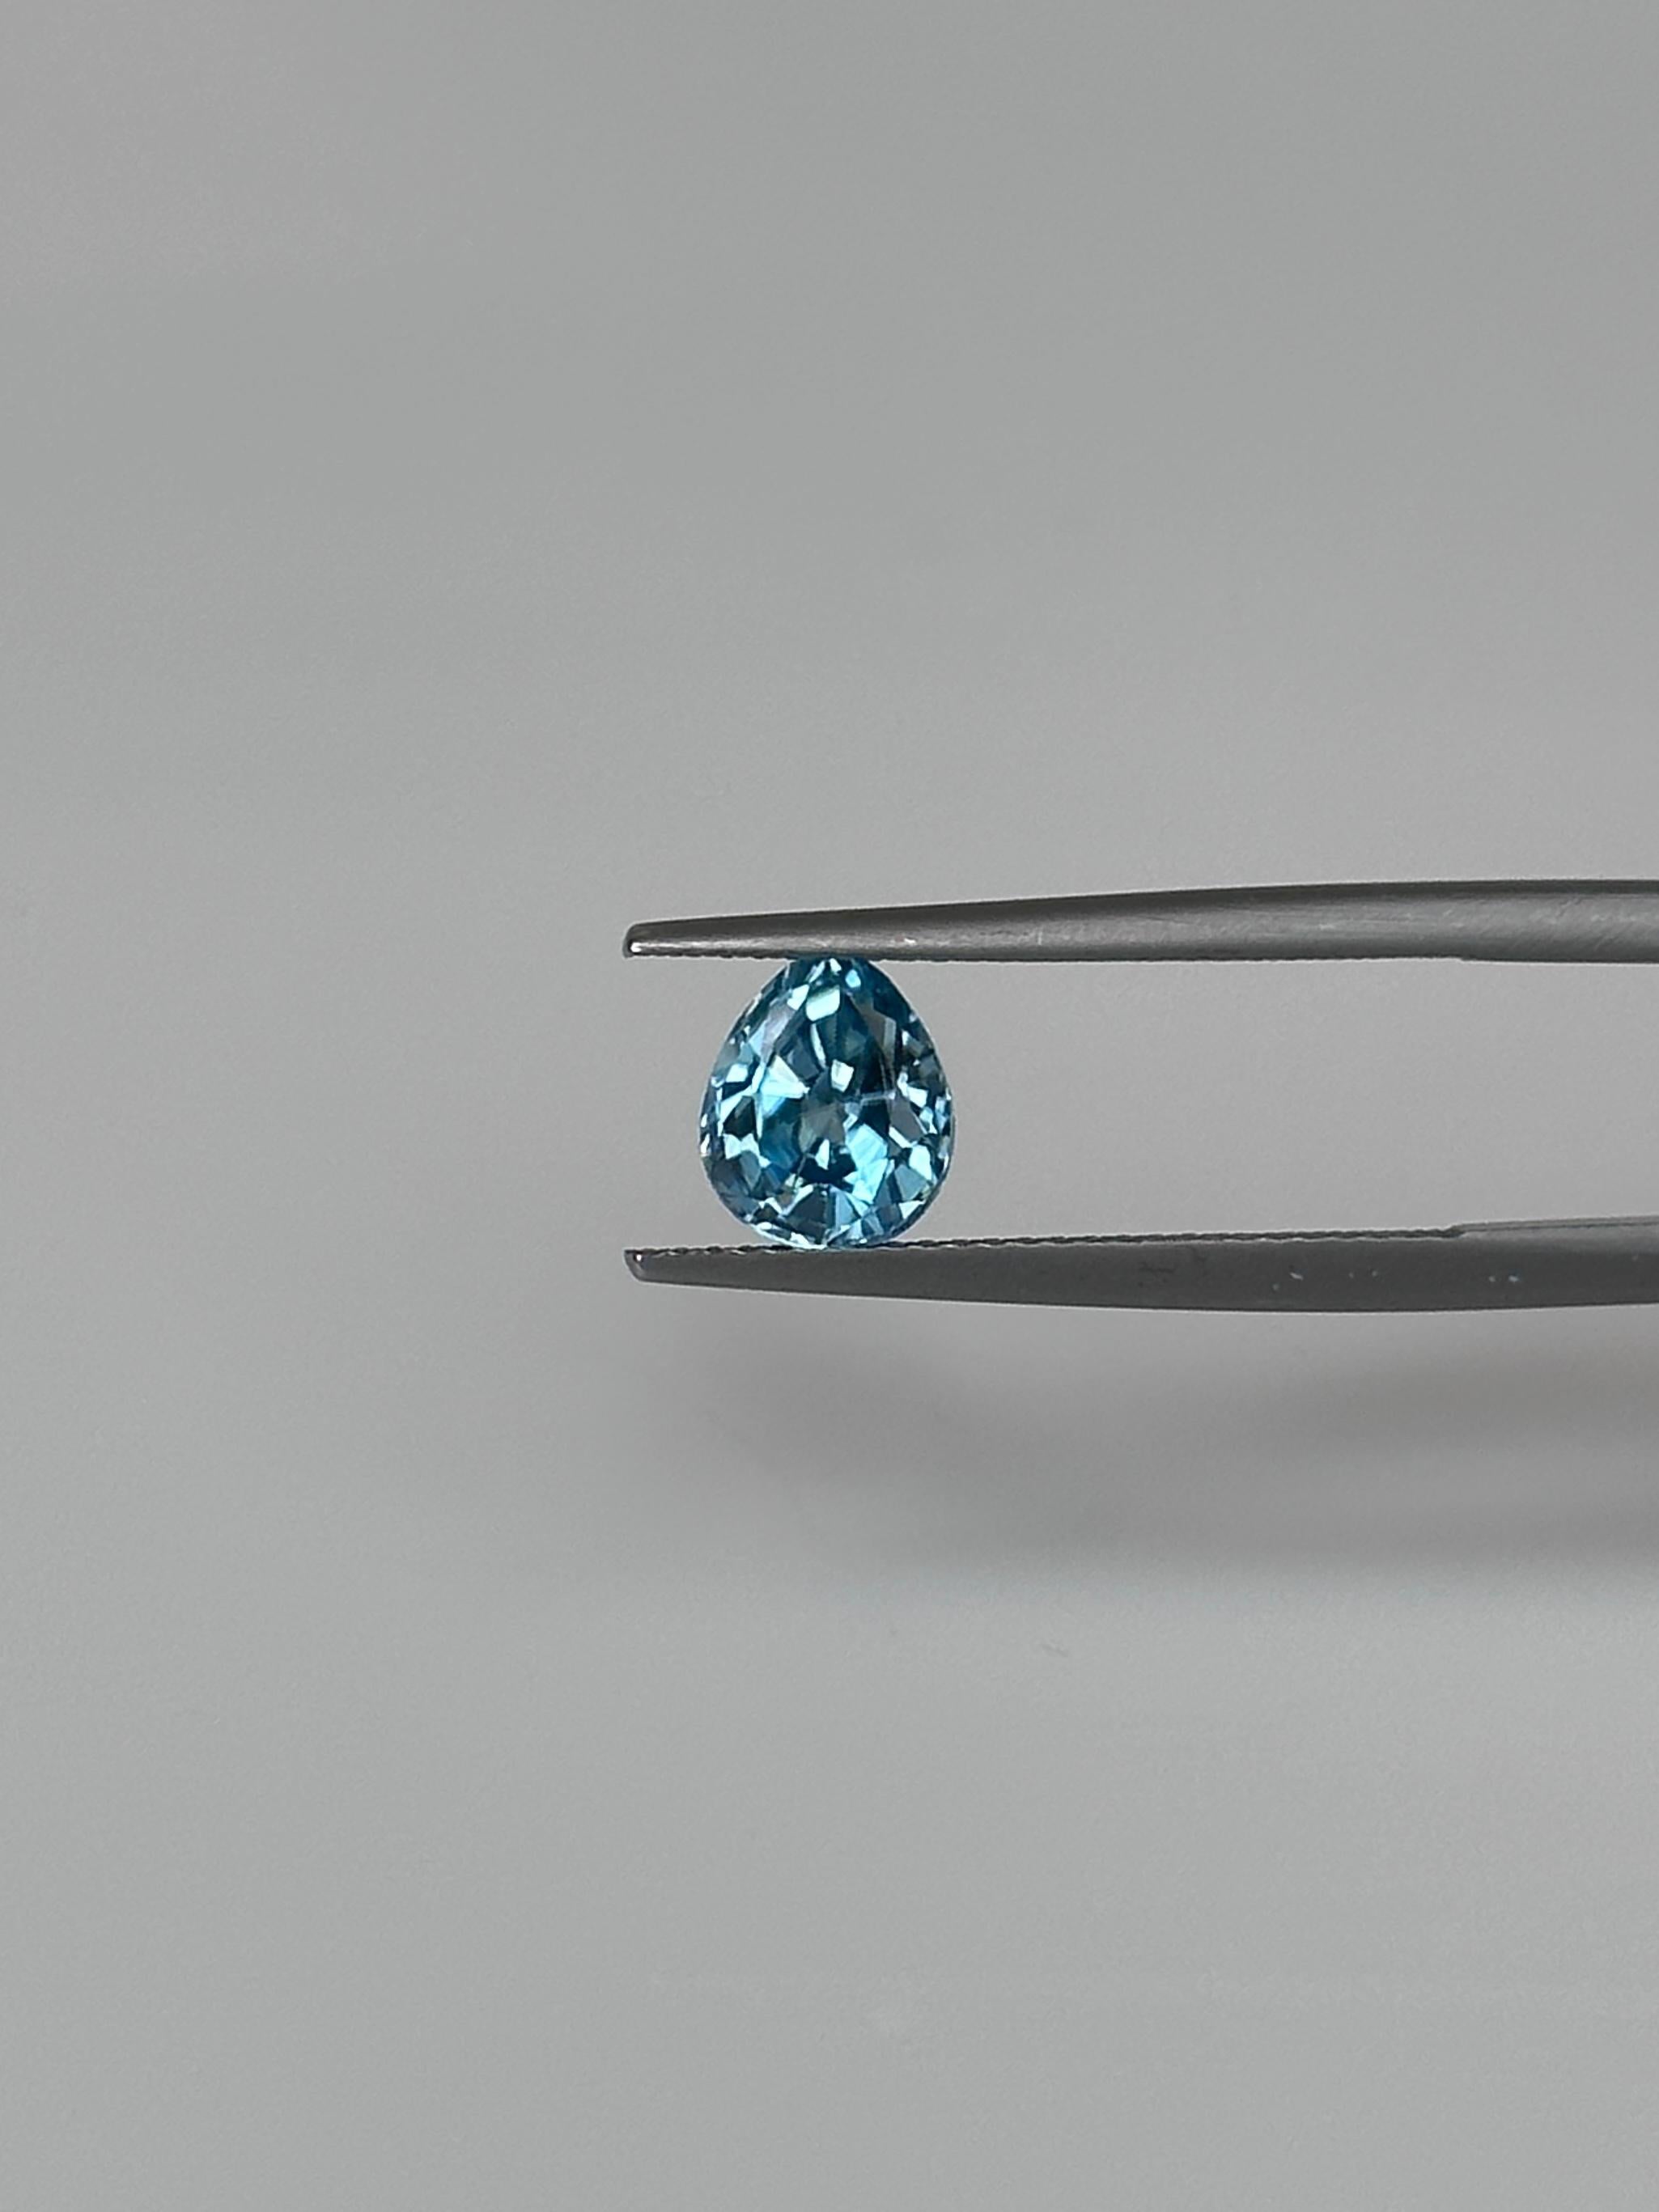 Sparkling Pear-cut Metallic Blue Zircon

This 2.02 carat Blue Zircon has a soothing grayish tinge with a dusky light blue color. Giving it the 